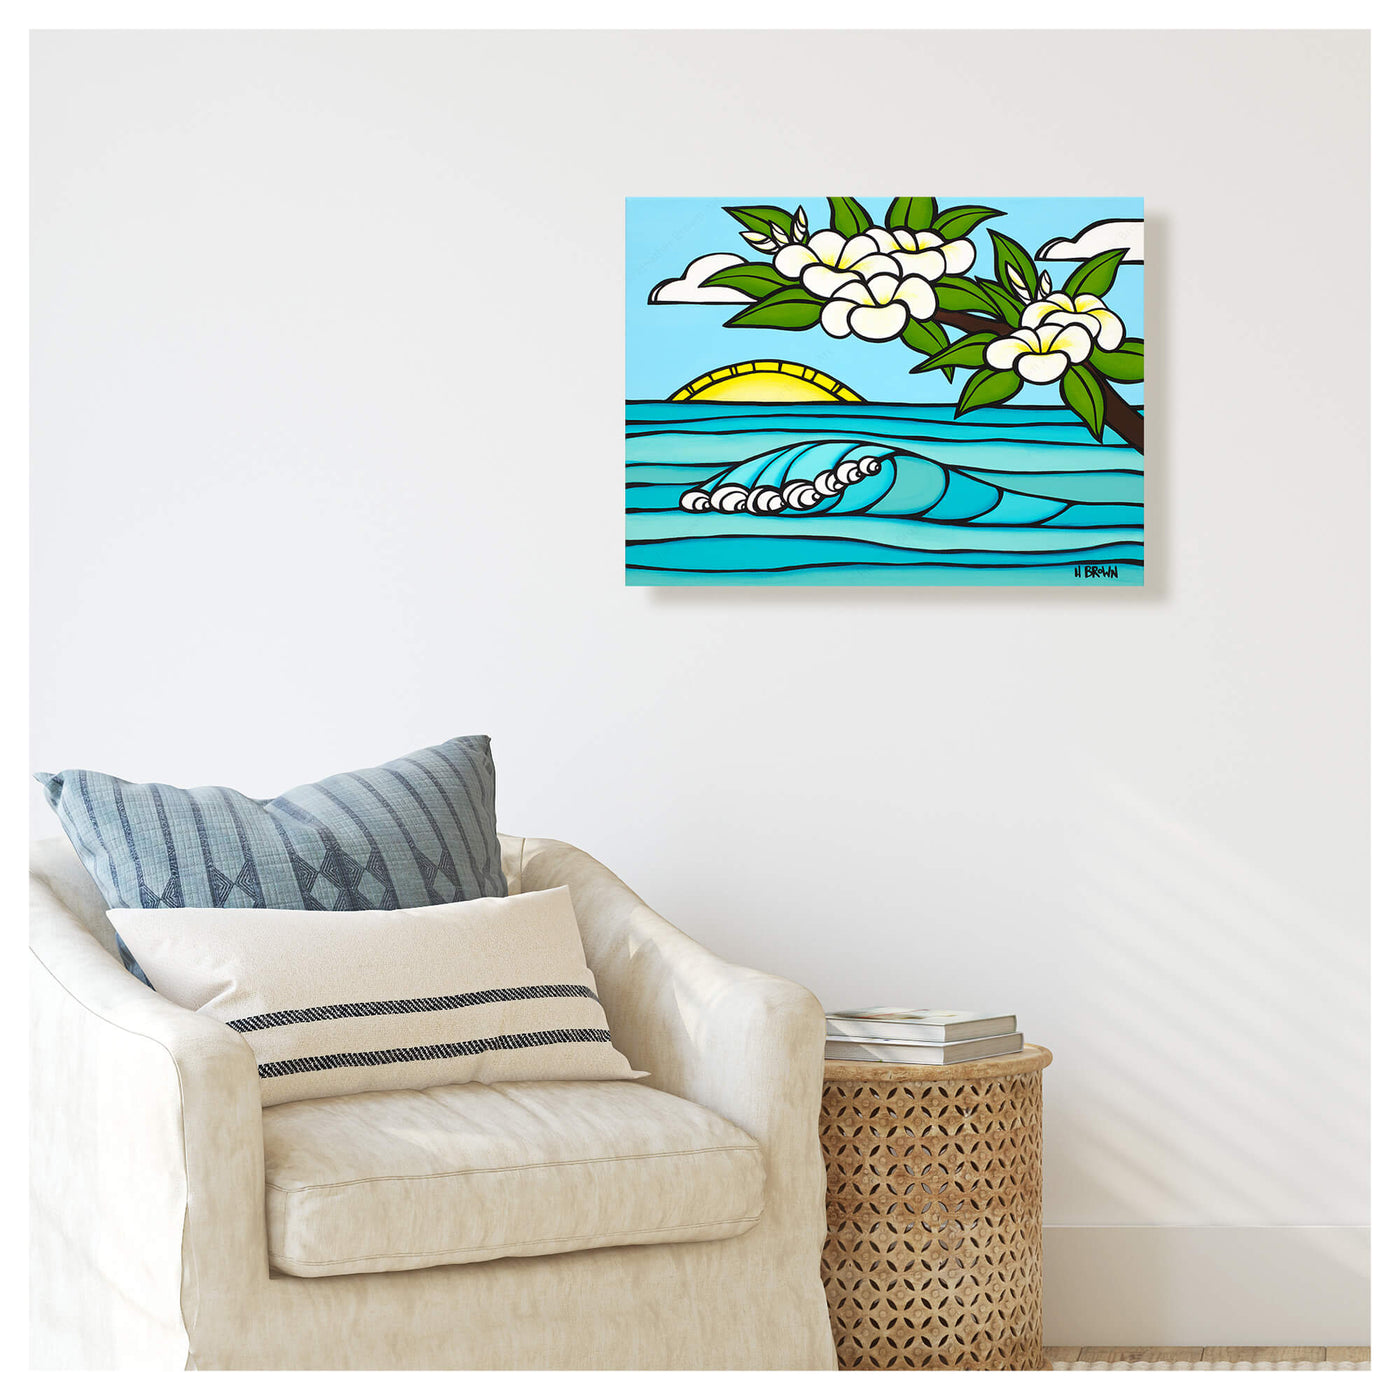 A canvas giclée print of a sunrise with rolling waves and plumeria flowers by Hawaii surf artist Heather Brown